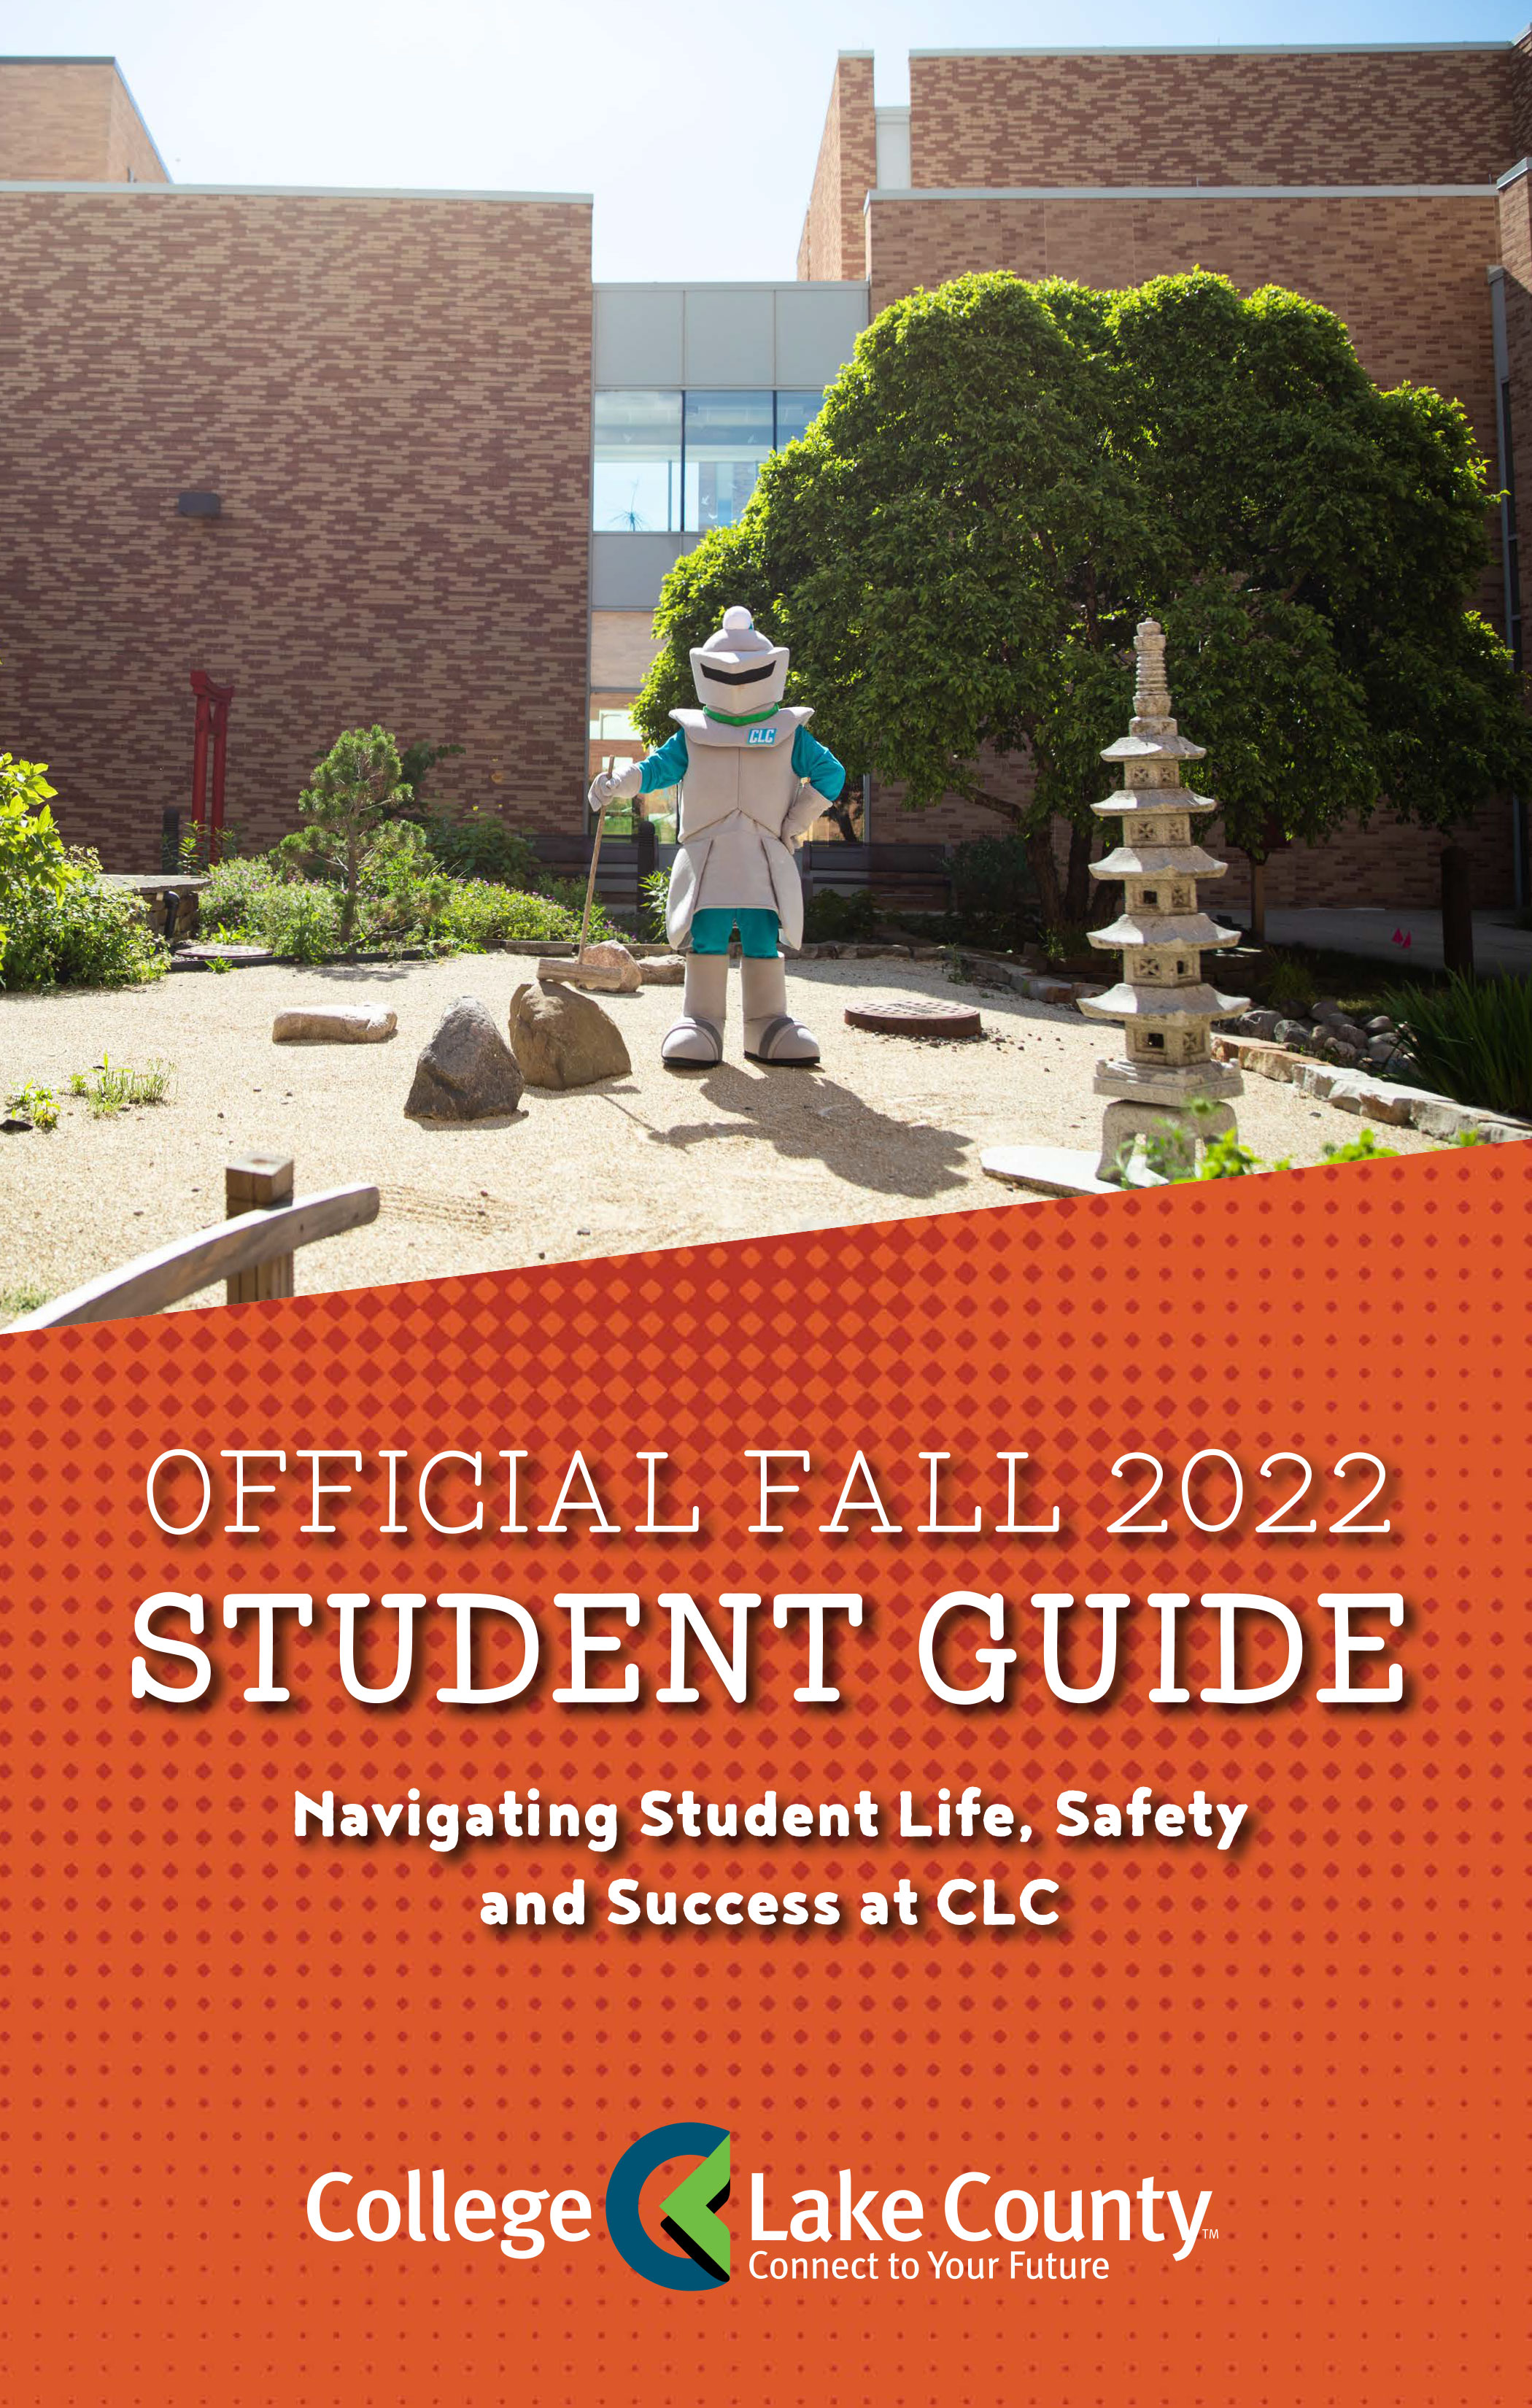 CLC Student Guide for Fall Semester 2022